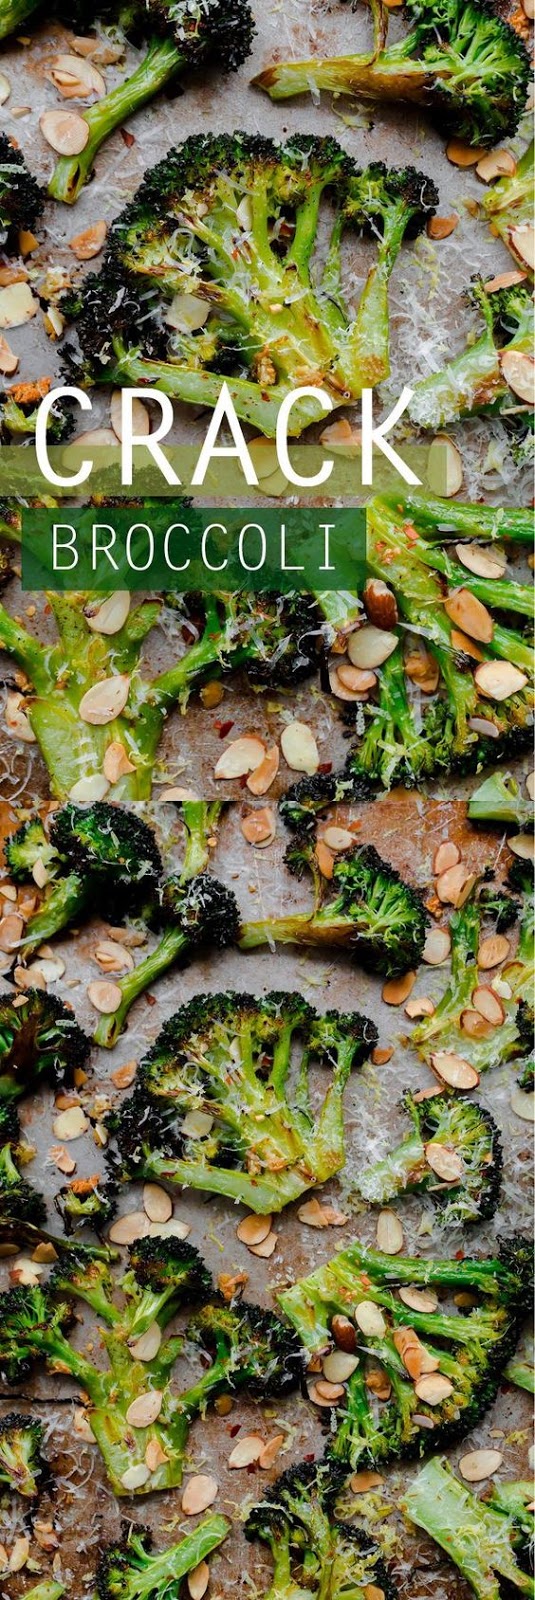 Roasted broccoli tossed with sliced toasted almonds, red pepper flakes, garlic, lemon juice, and aged pecorino cheese. Aka. ‘crack broccoli’. You won’t be able to stop eating this delicious side dish! Vegetarian and naturally gluten free